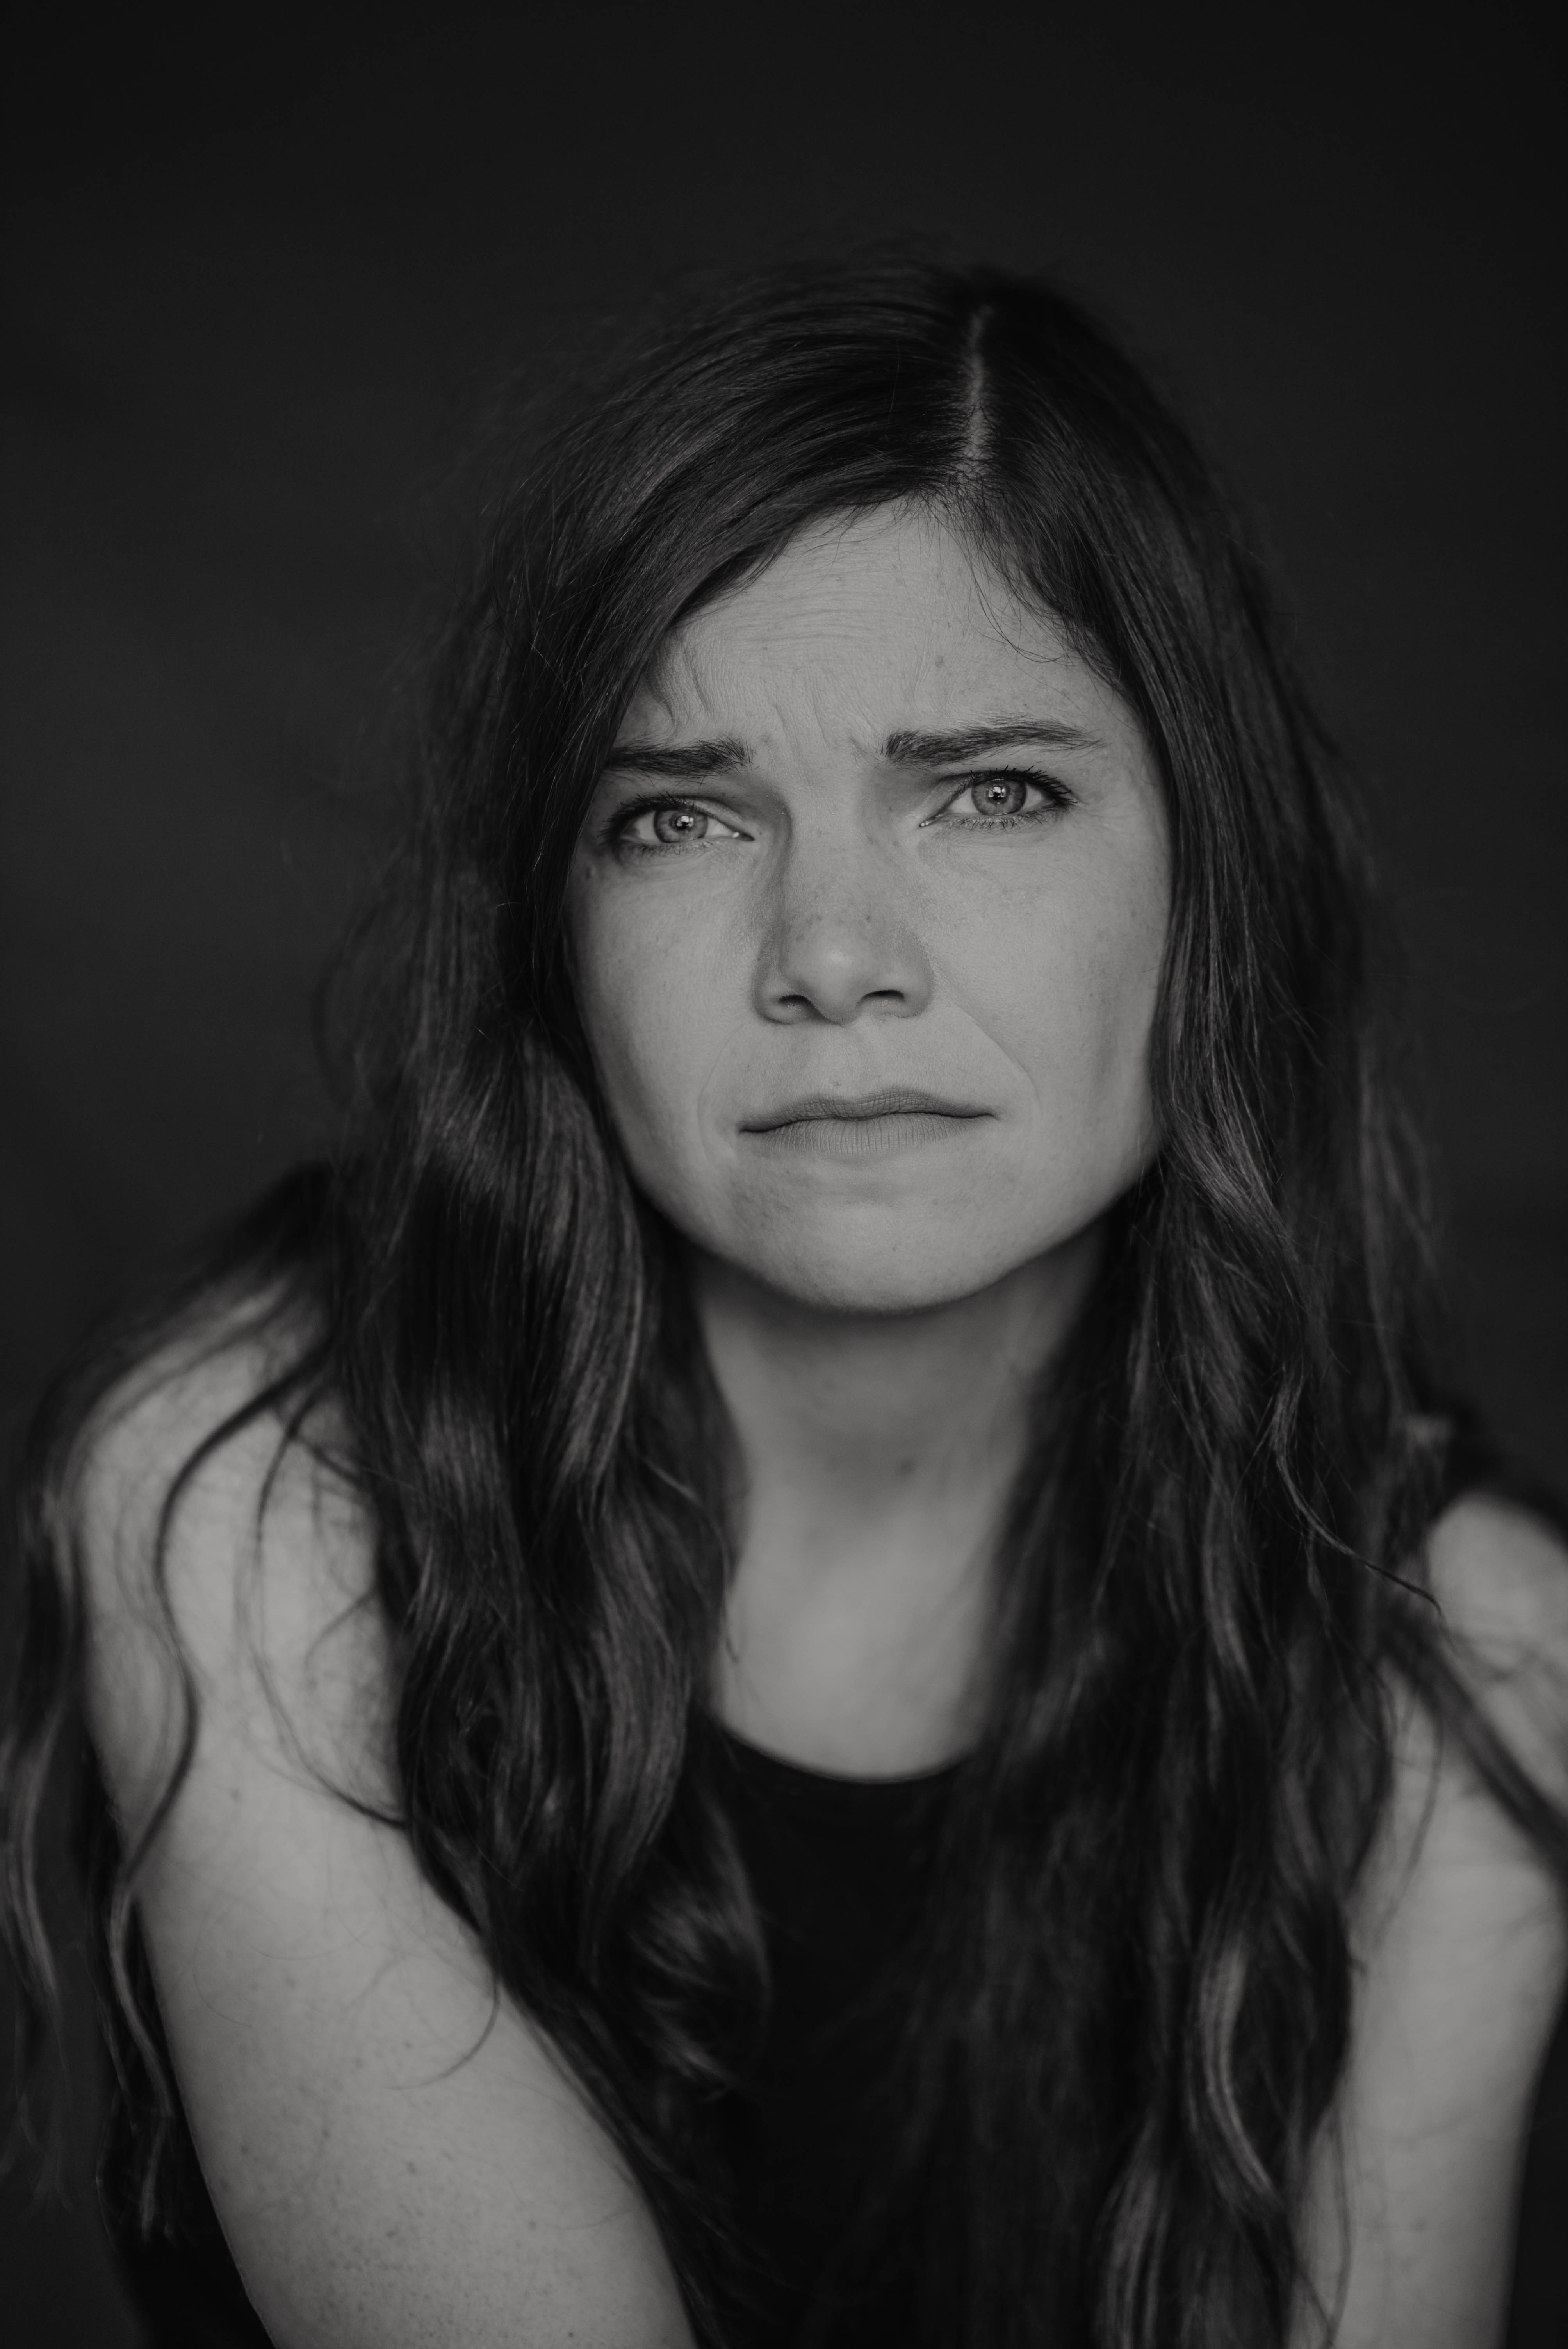 Outtake from a headshot session. Actress with a confused expression.